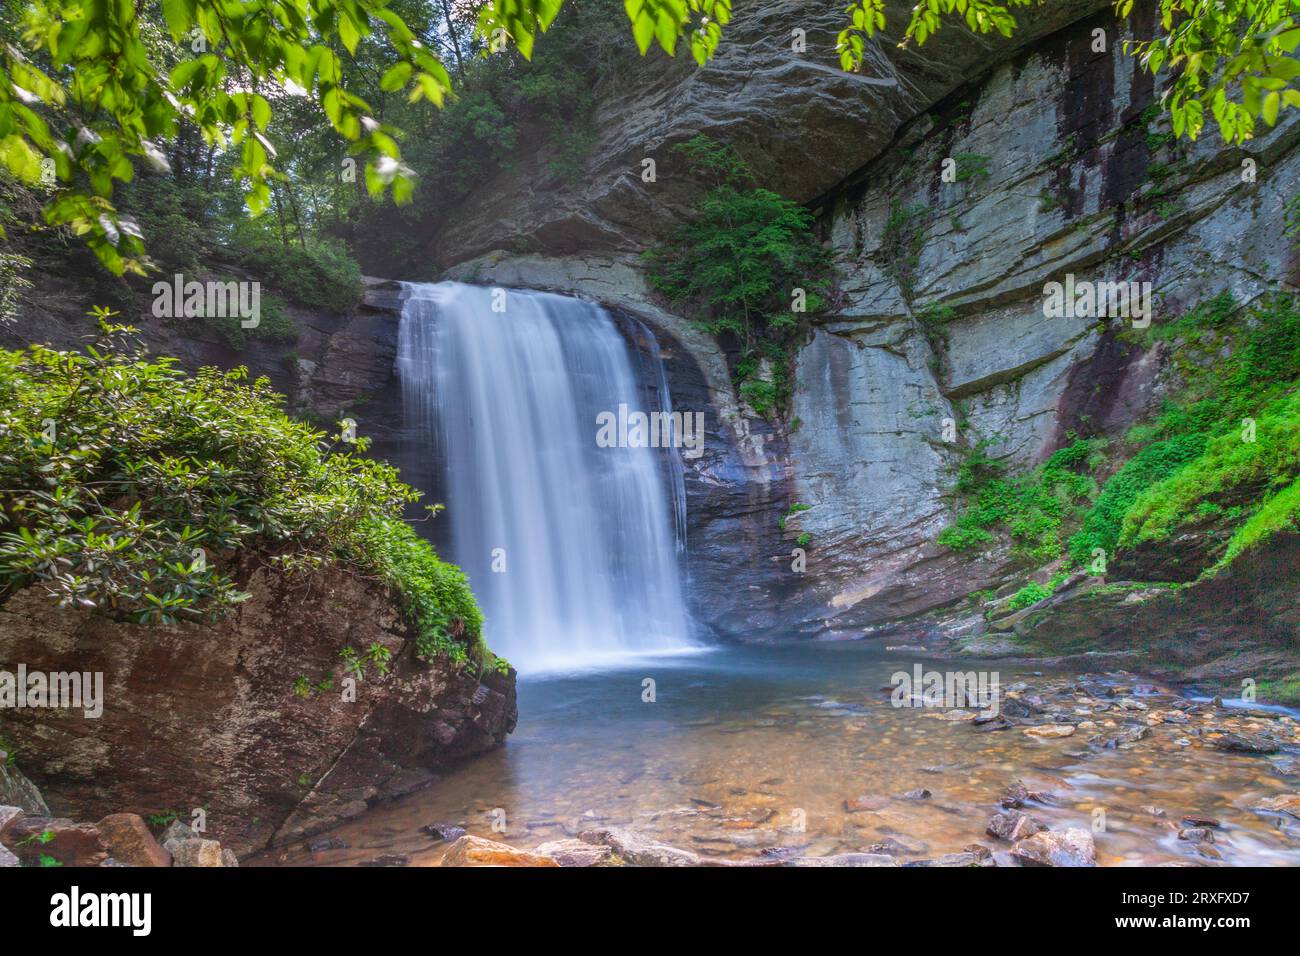 Looking Glass Falls in the Pisgah National Forest in North Carolina. The name 'Looking Glass' comes from the dome of Looking Glass Rock. Stock Photo